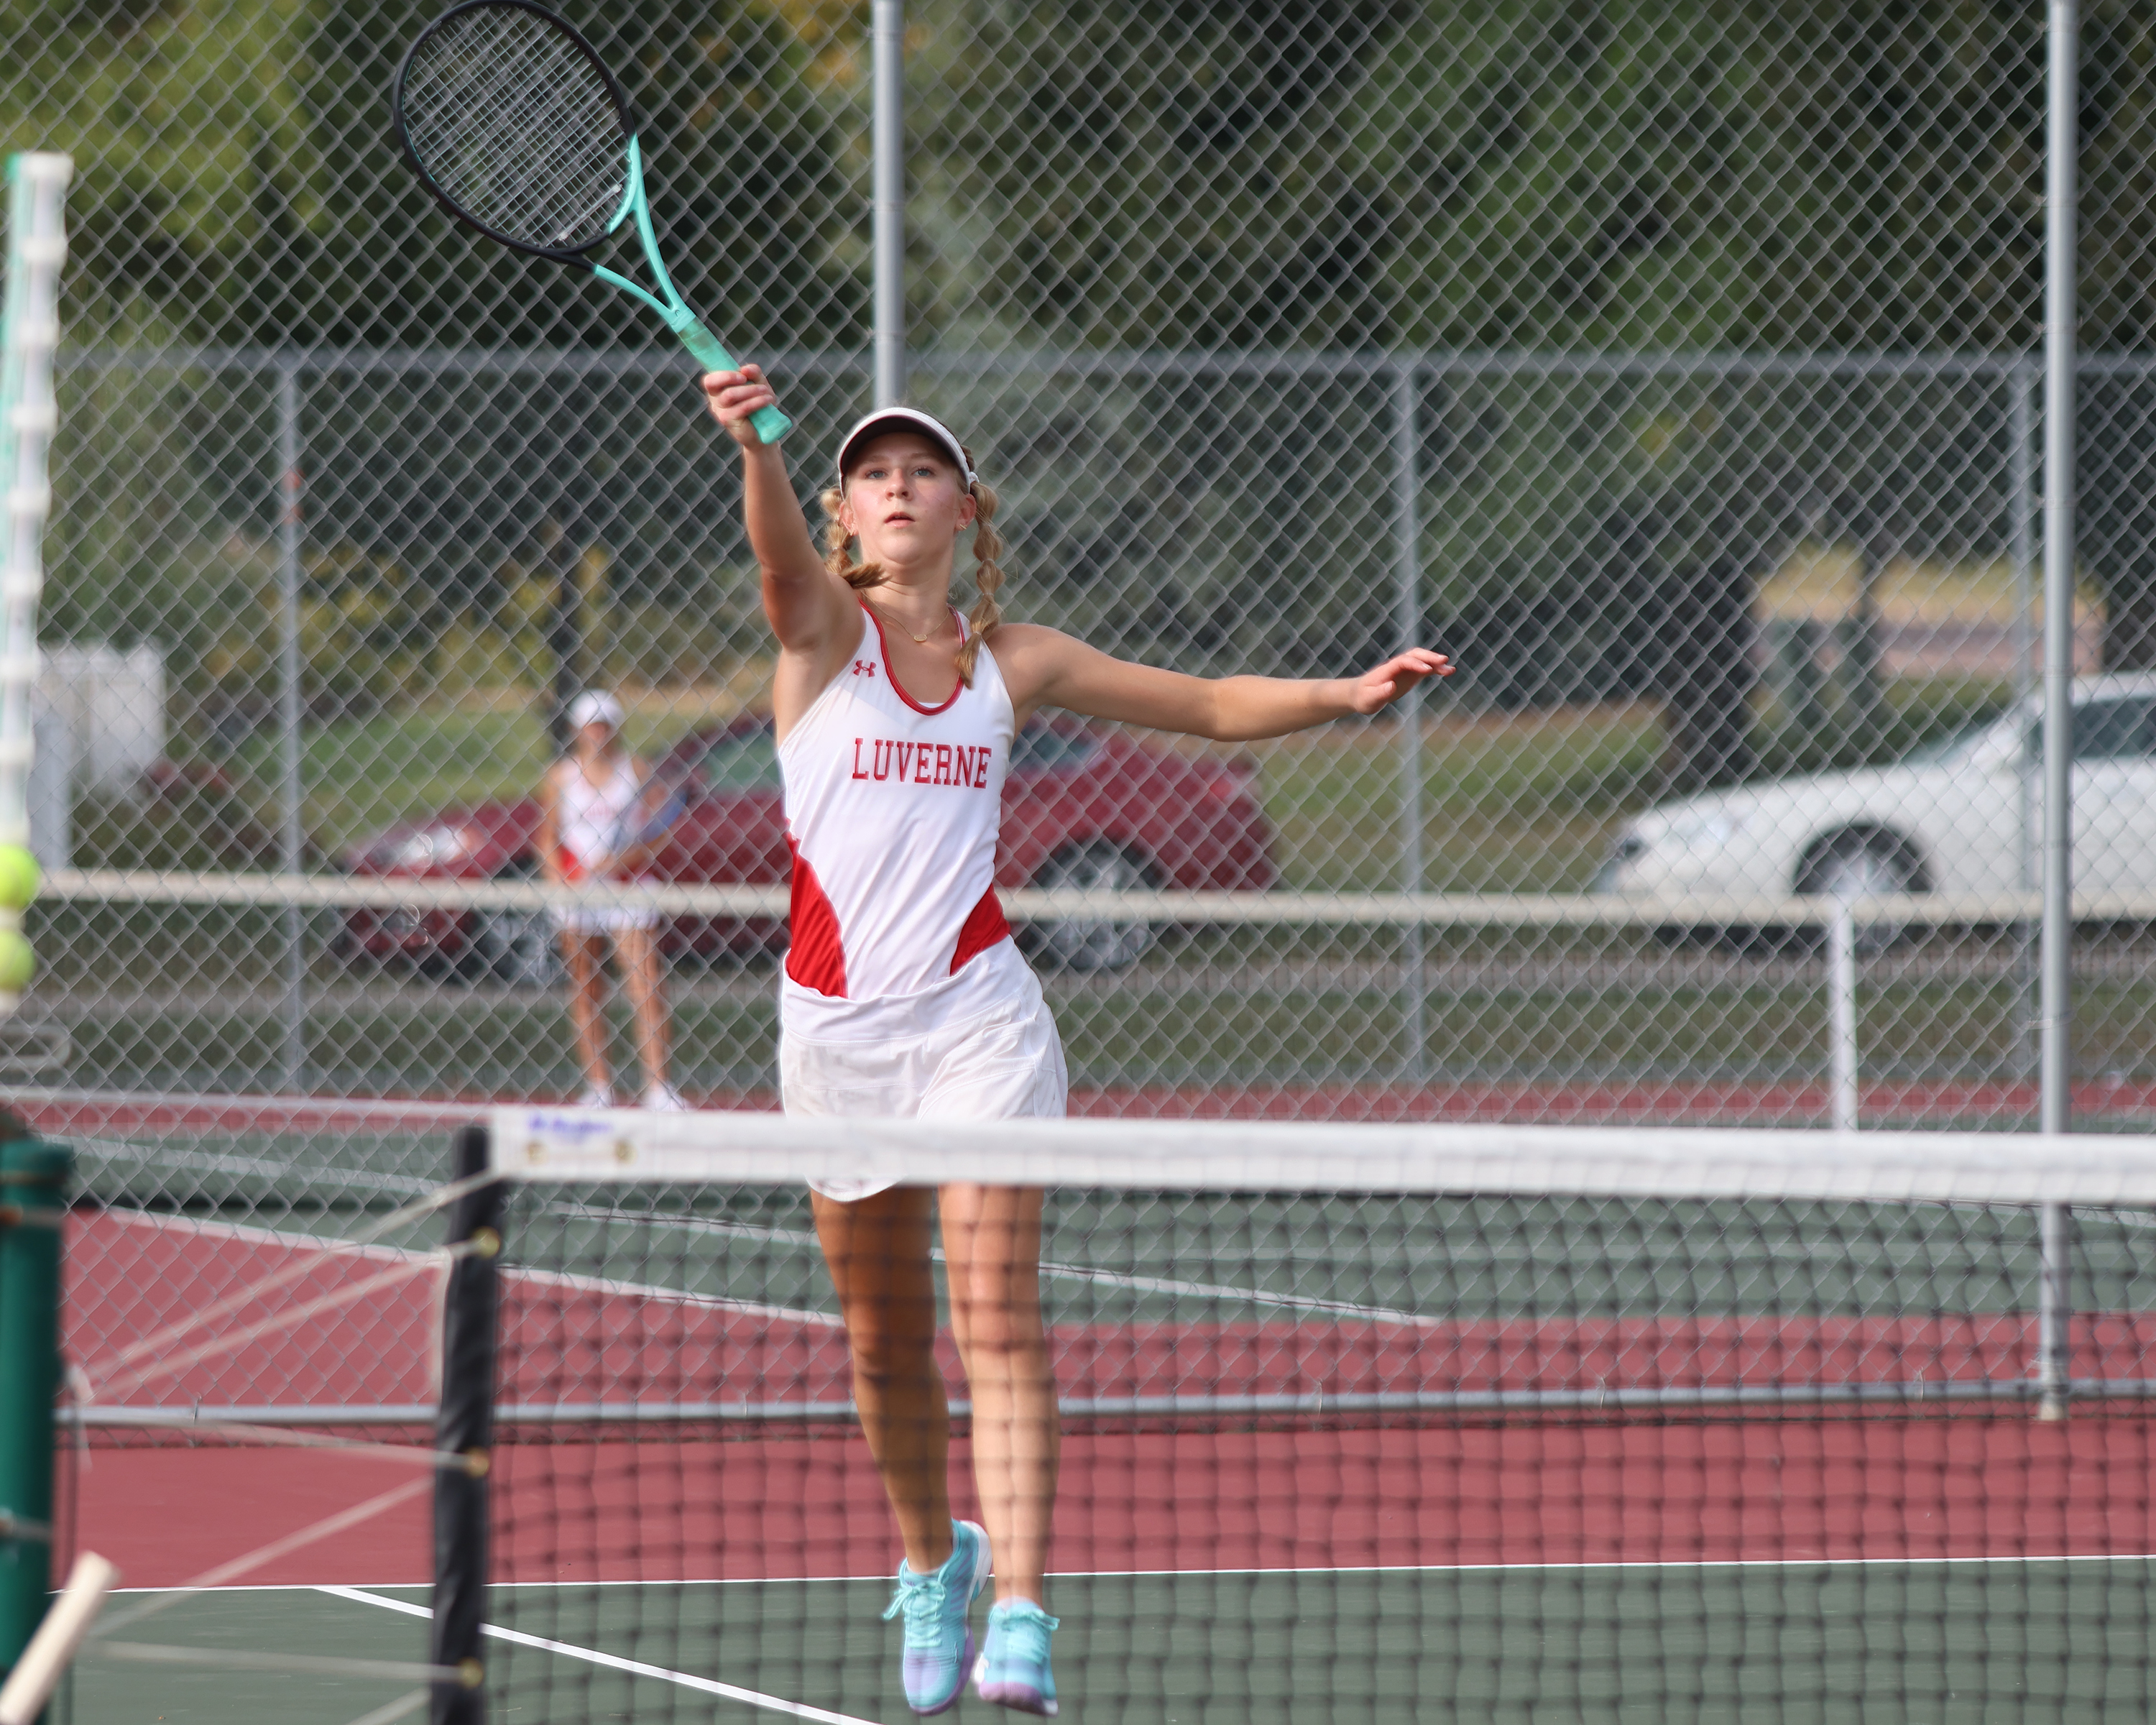 Junior Emma Nath returns a volley against her Fairmont opponent Tuesday, Aug. 29, in Luverne.